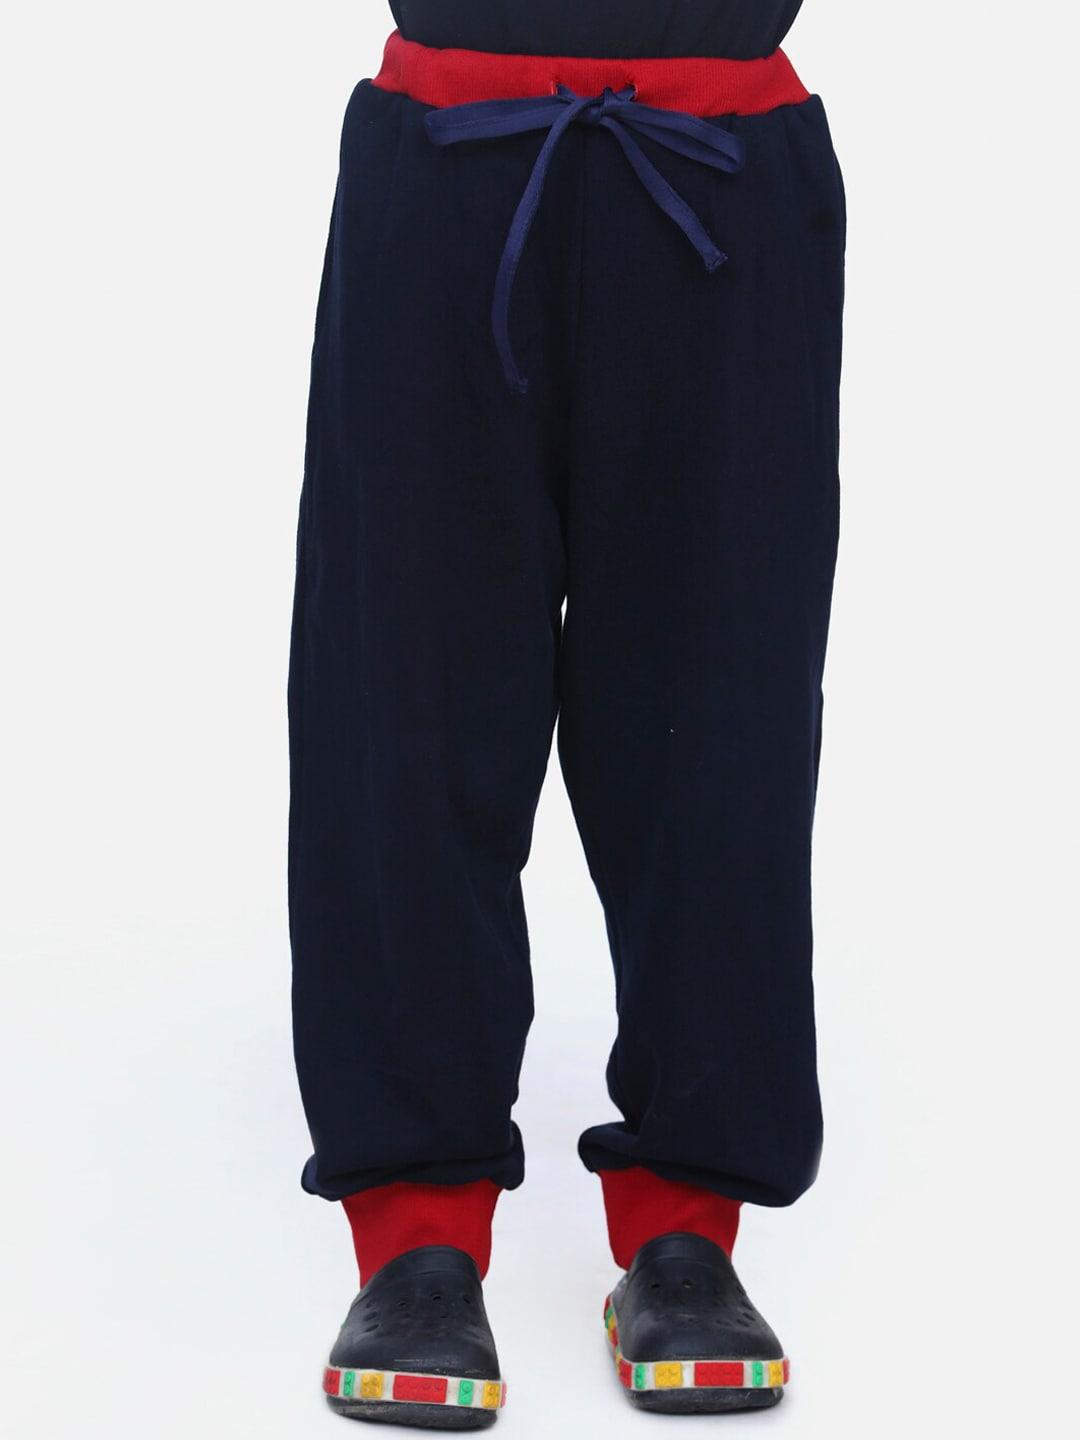 lilpicks boys navy blue & red solid slim-fit joggers